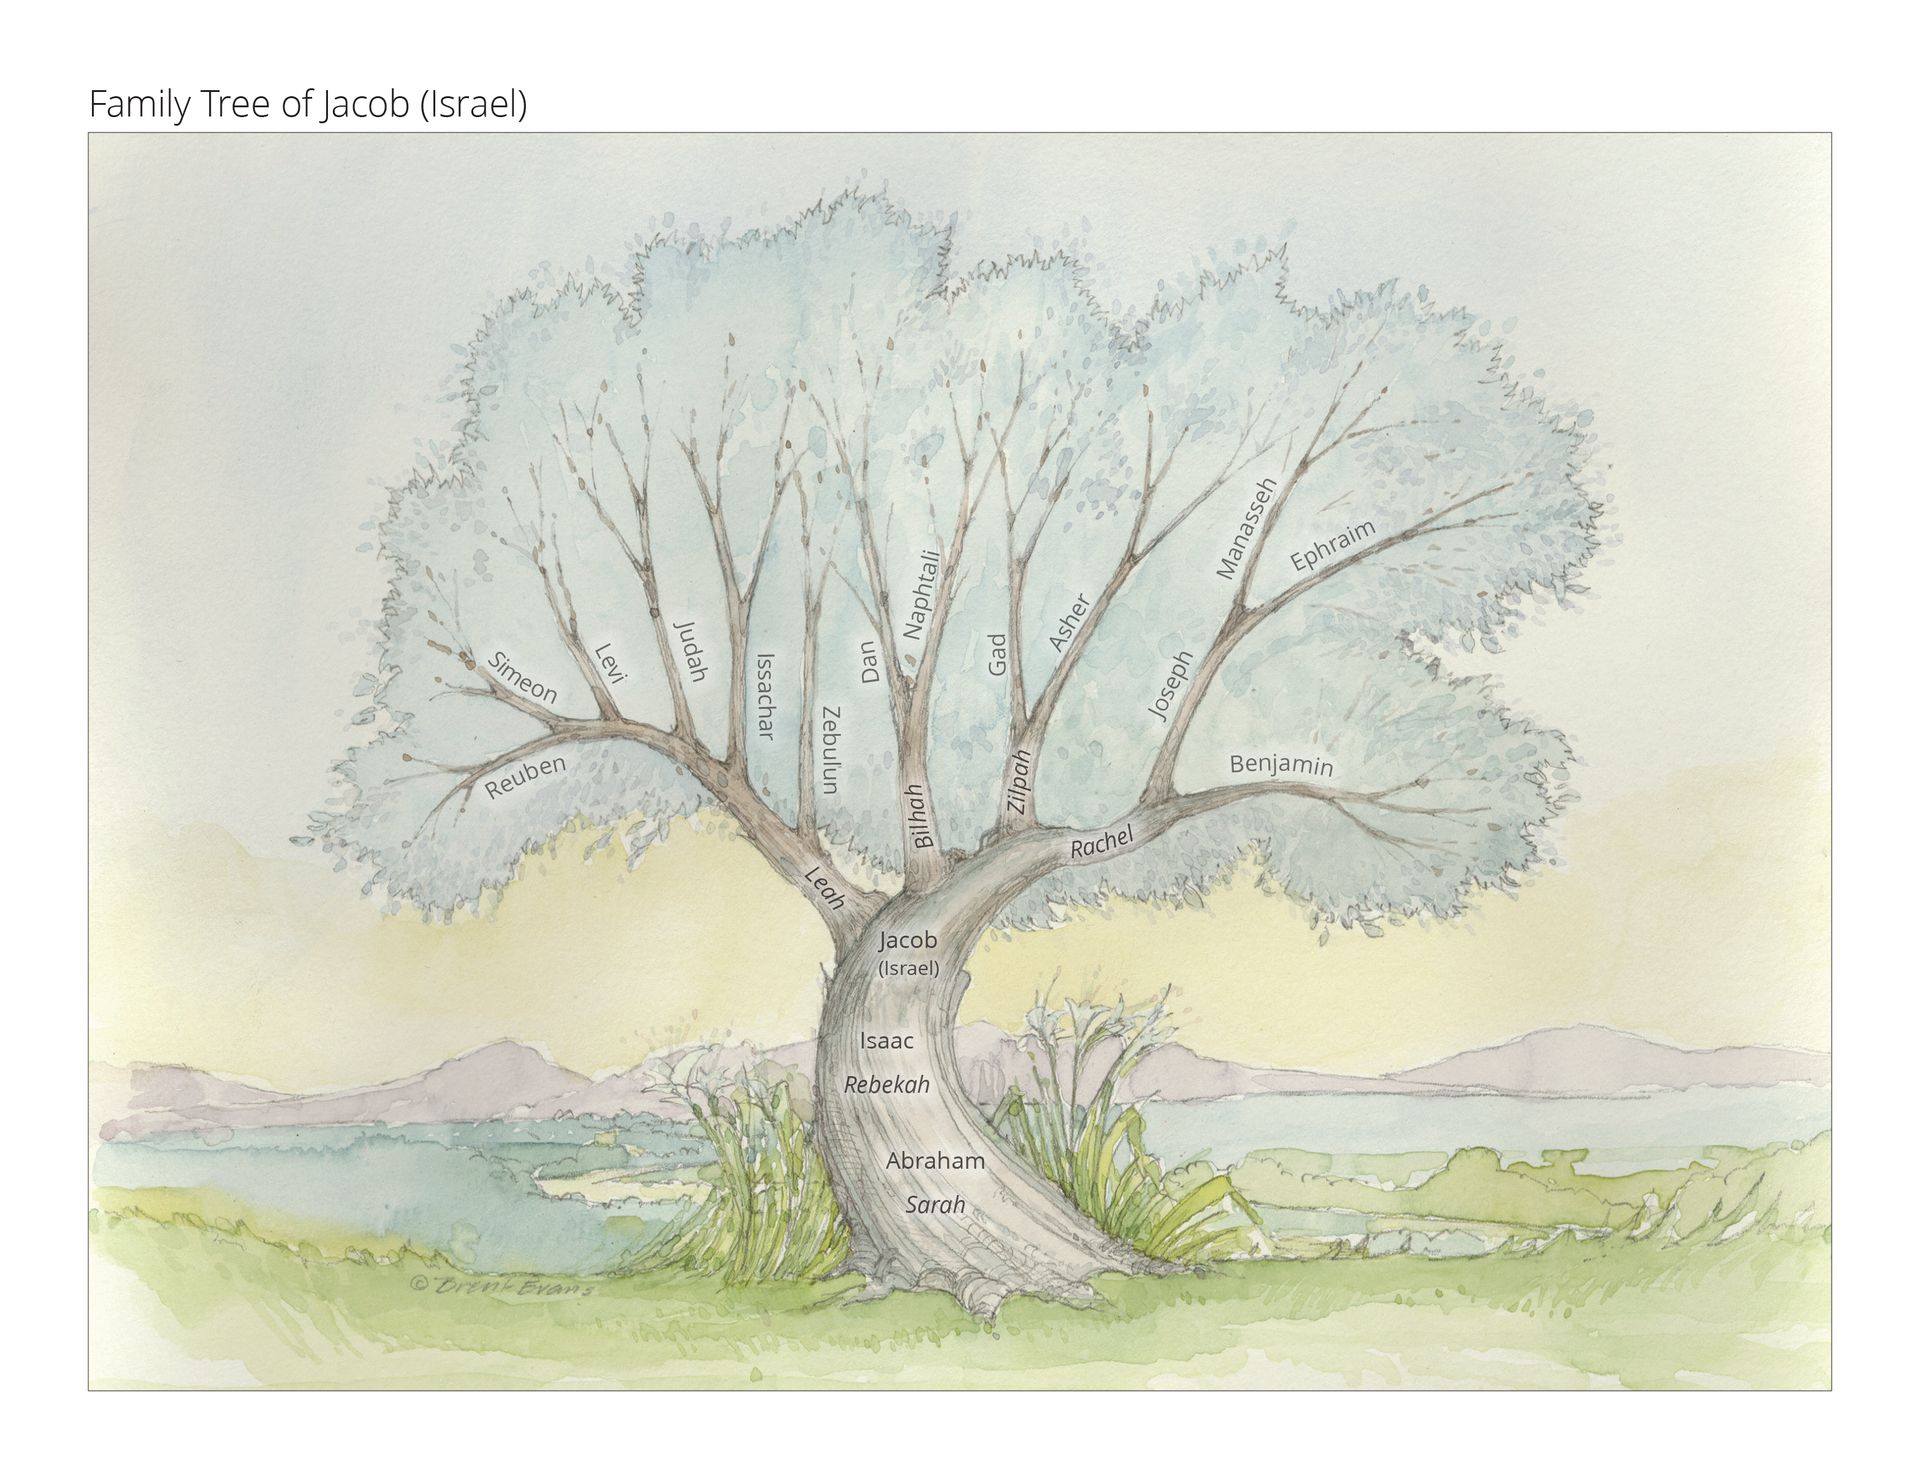 A tree is growing up that represents Jacob's family tree.